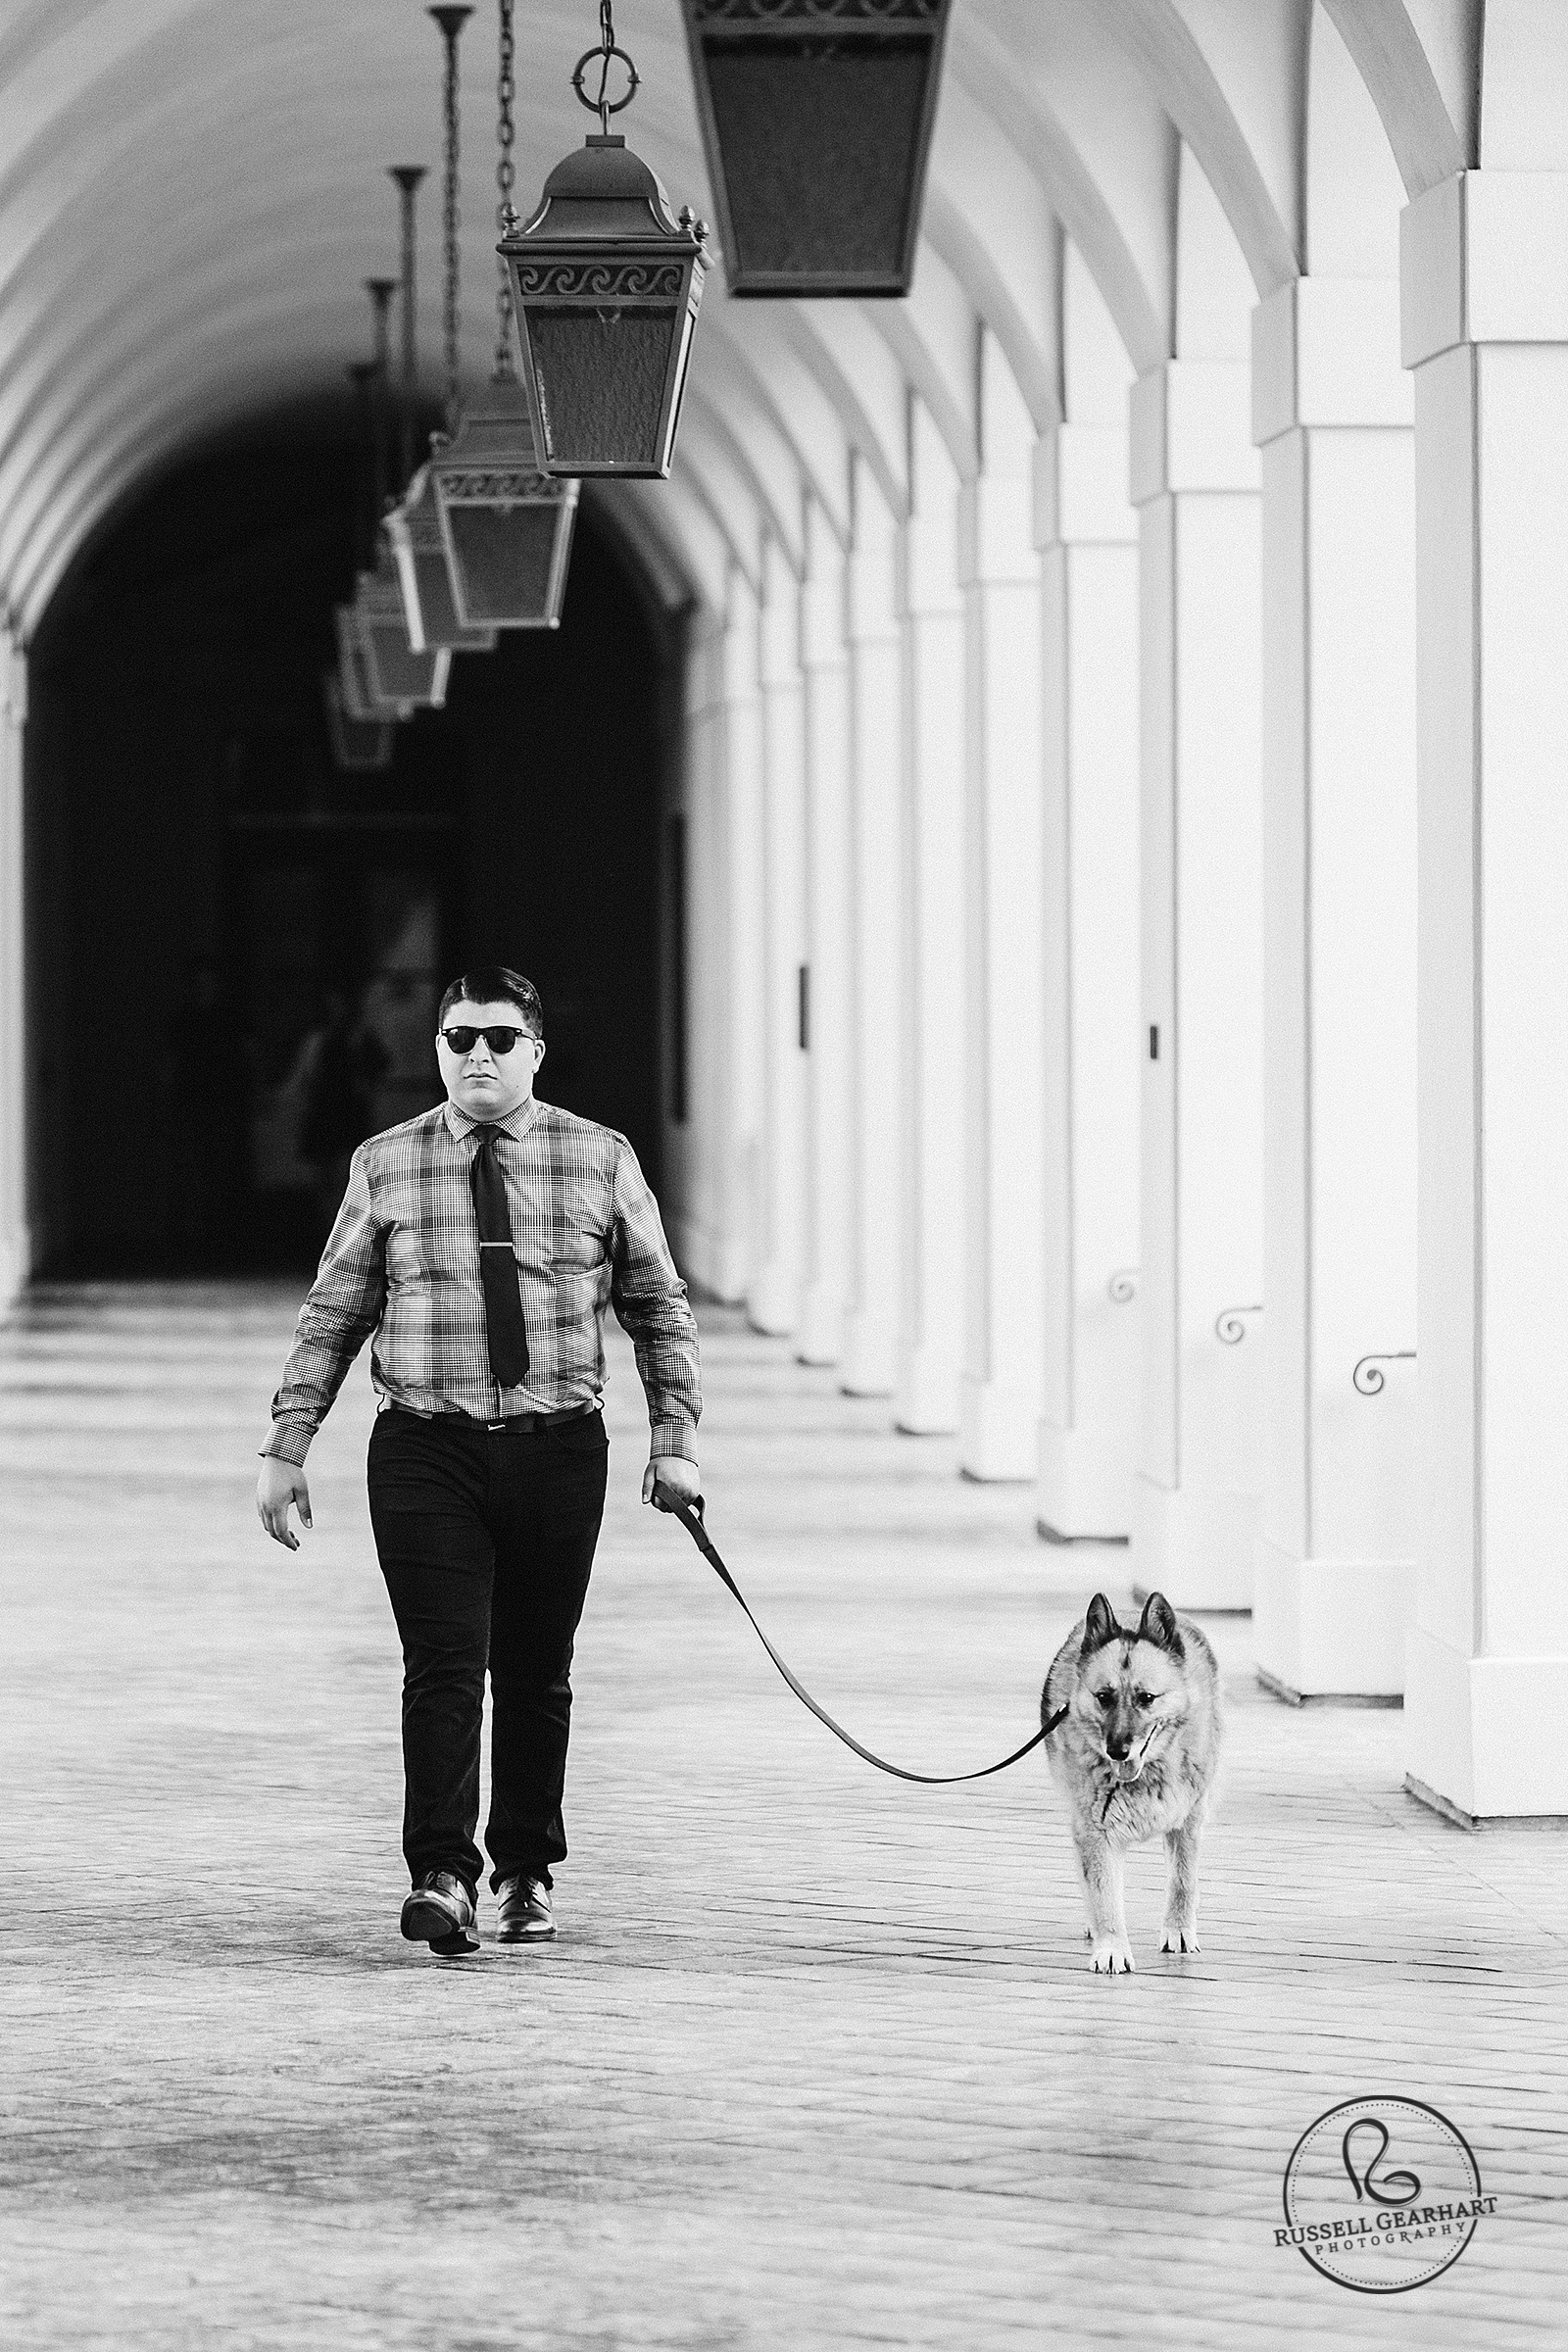 Walking the Dog - Old Town Pasadena Family Portraits – Russell Gearhart Photography – www.gearhartphoto.com